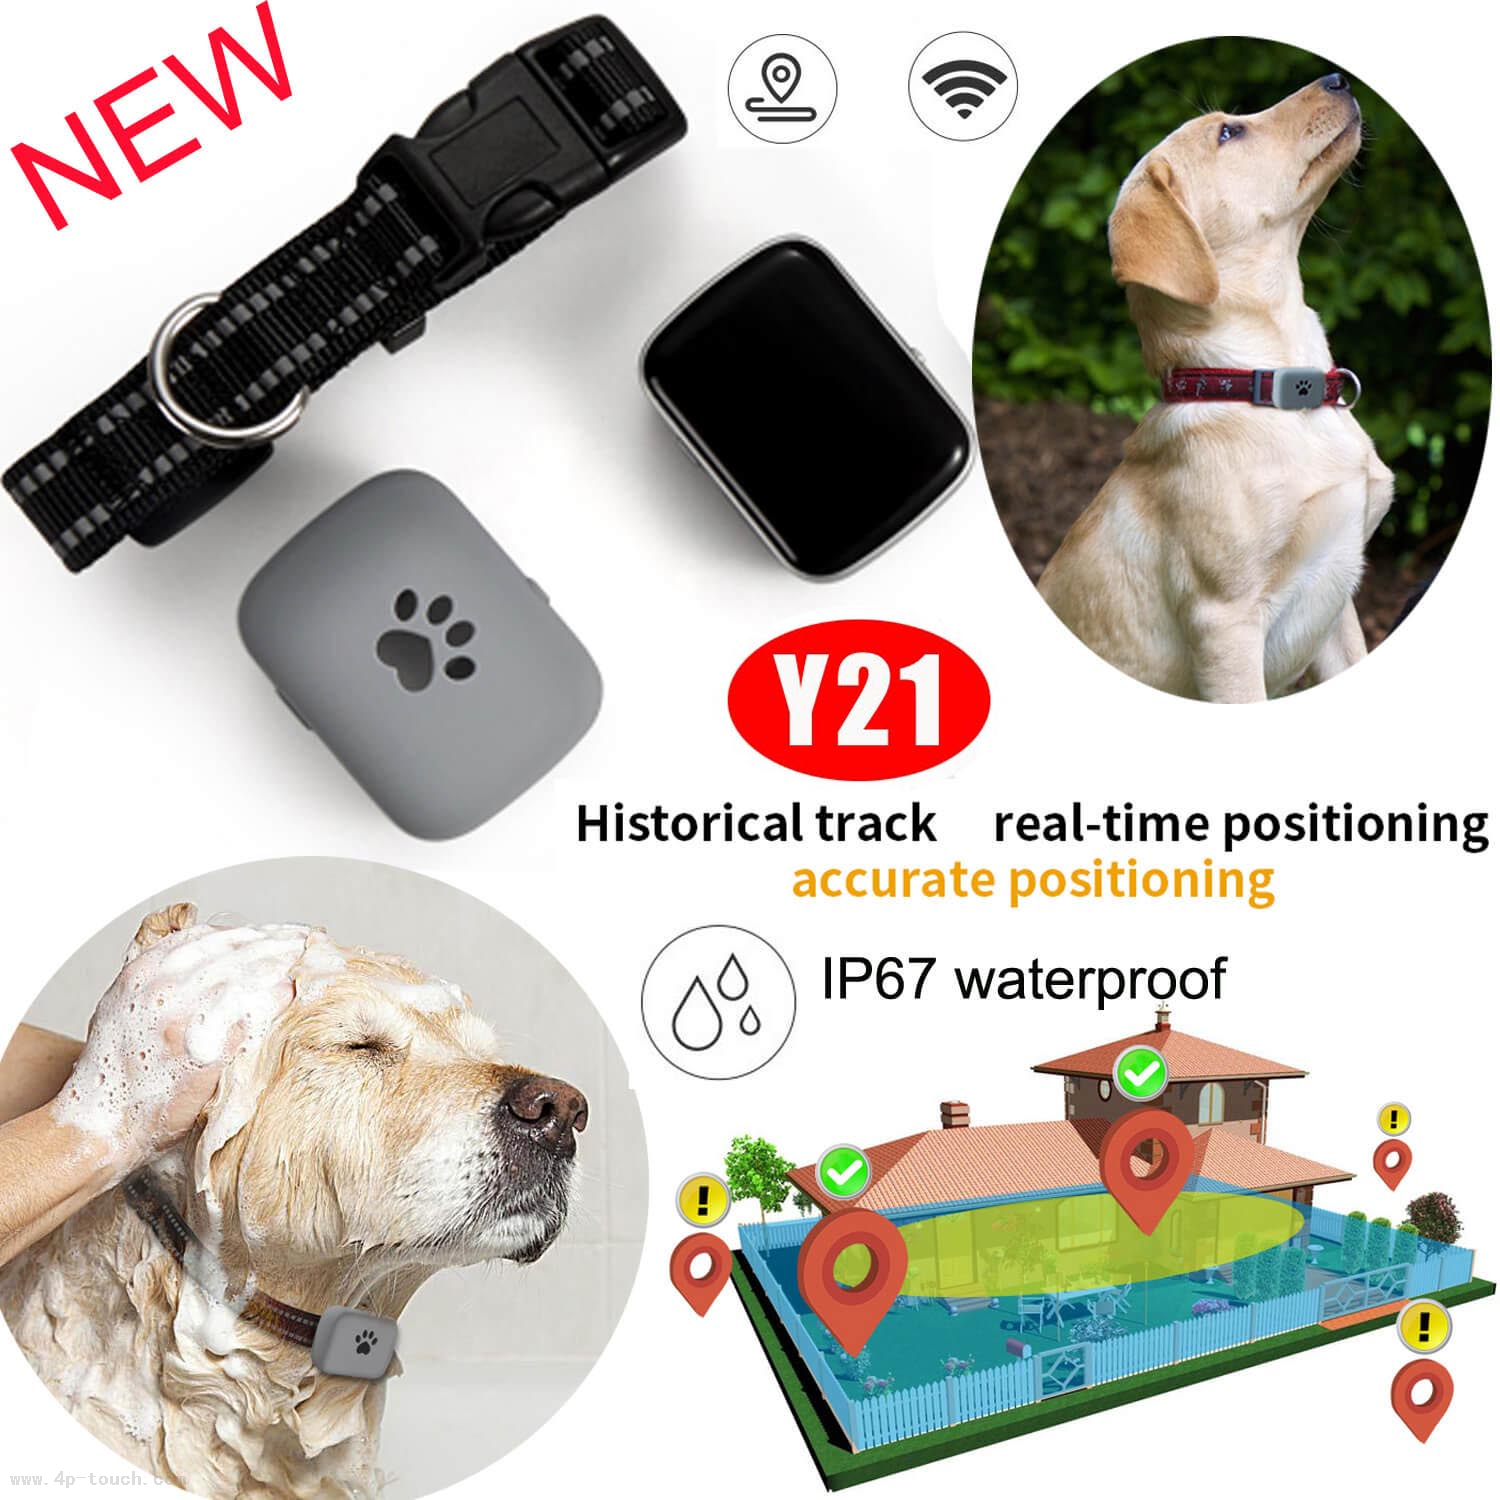 New Launched 2G Gadget GPS Tracker for Dog/Cat with 1000mAh Large Battery Capacity for Long Working Hours (Y21)